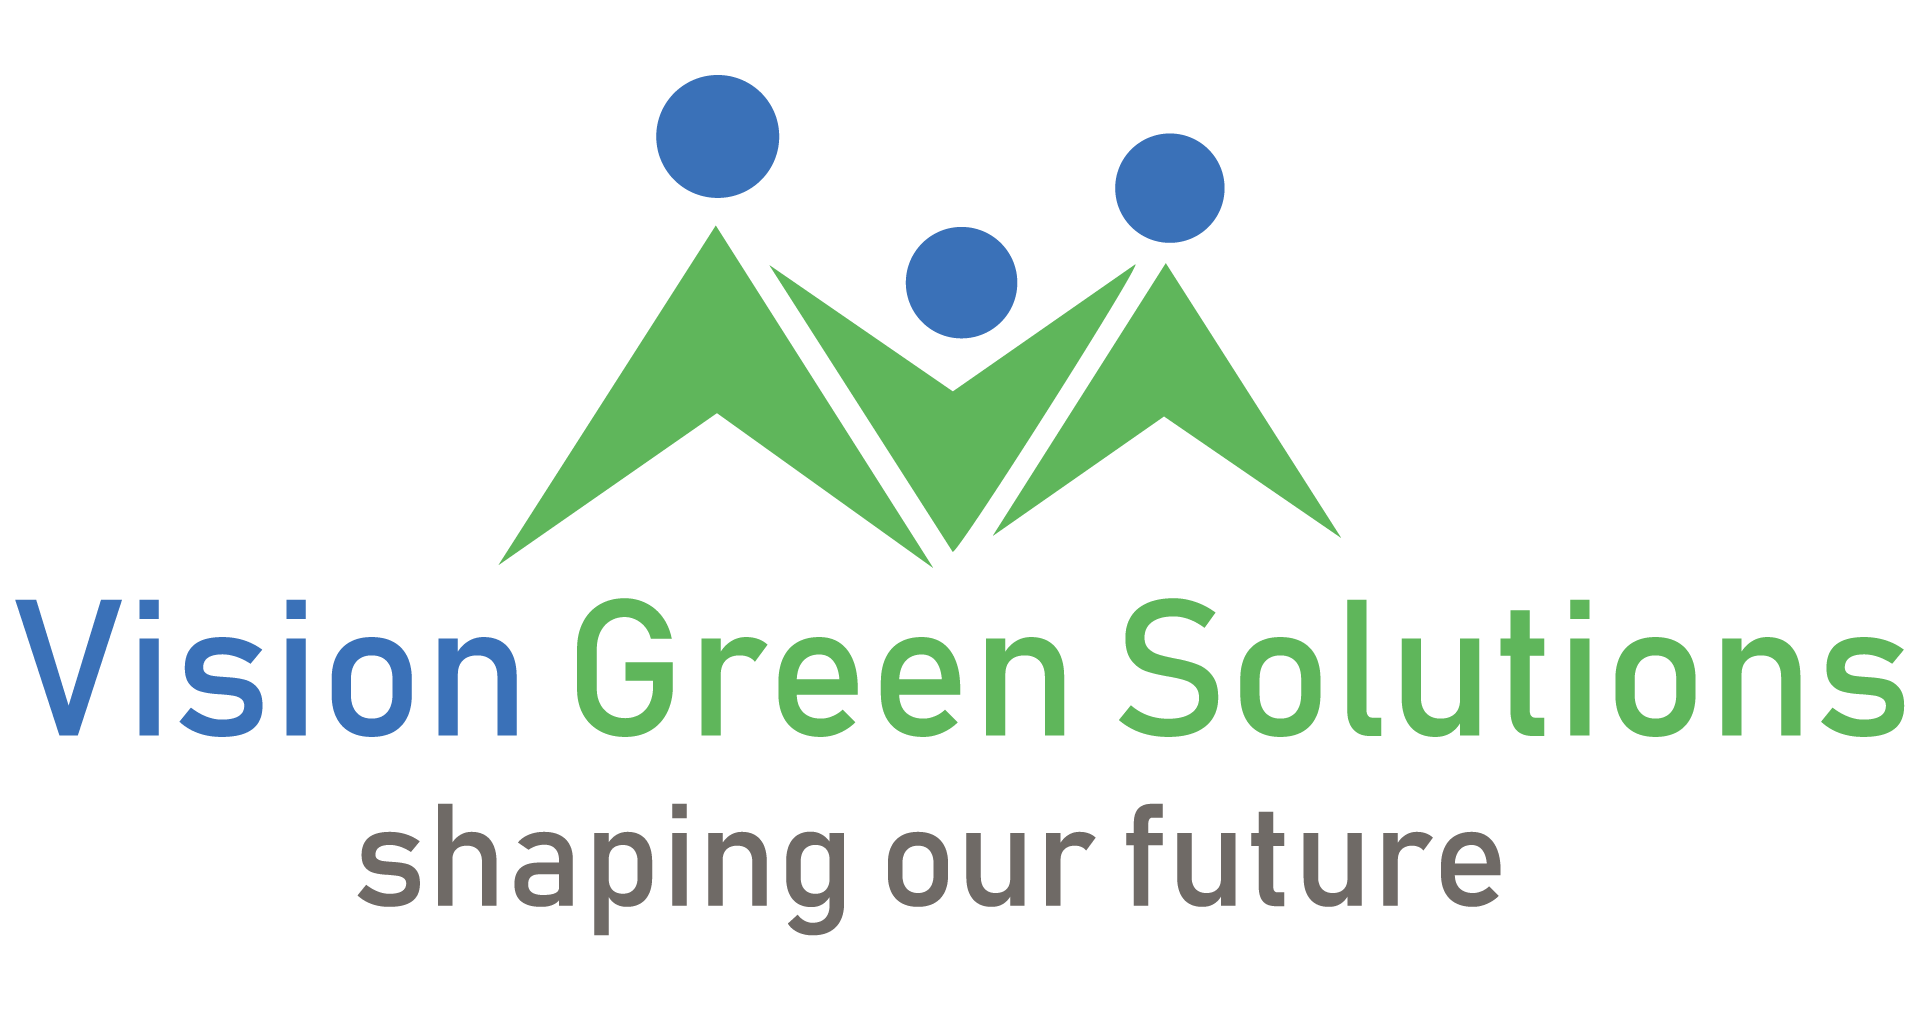 Vision Green Solutions